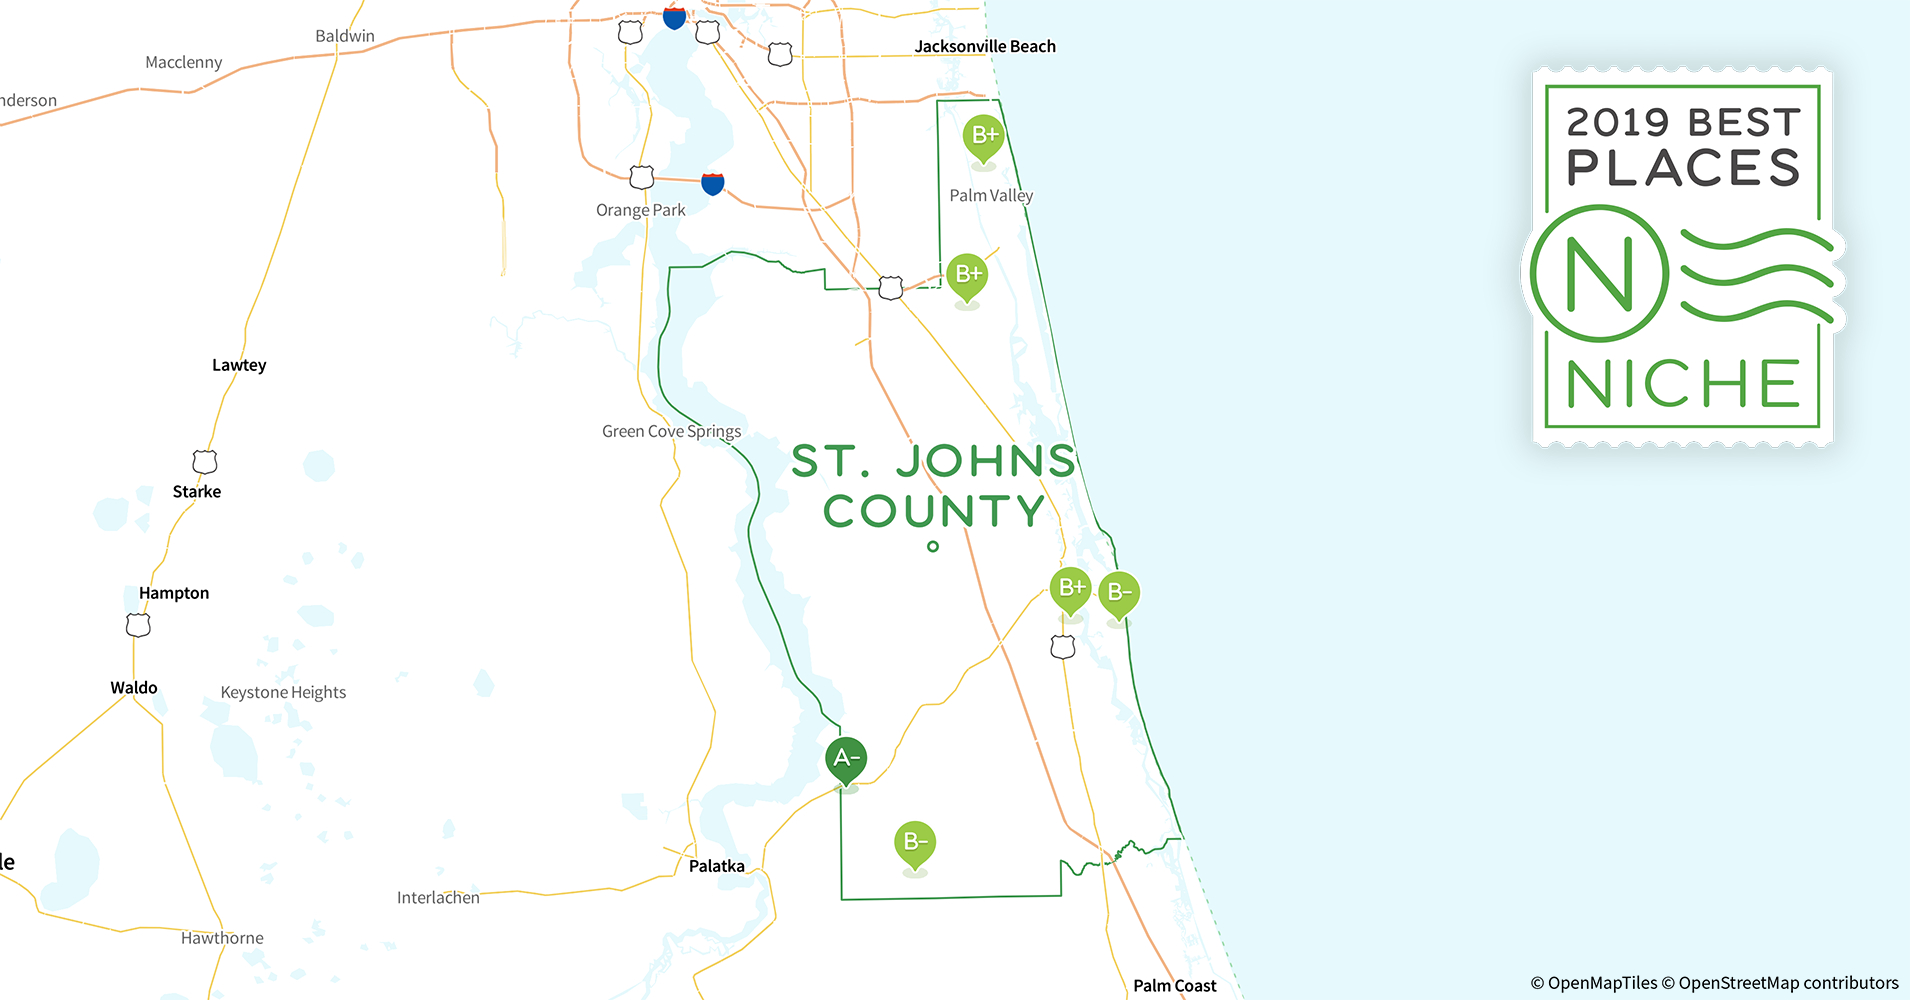 2019 Best Places To Live In St. Johns County, Fl - Niche - Port St John Florida Map